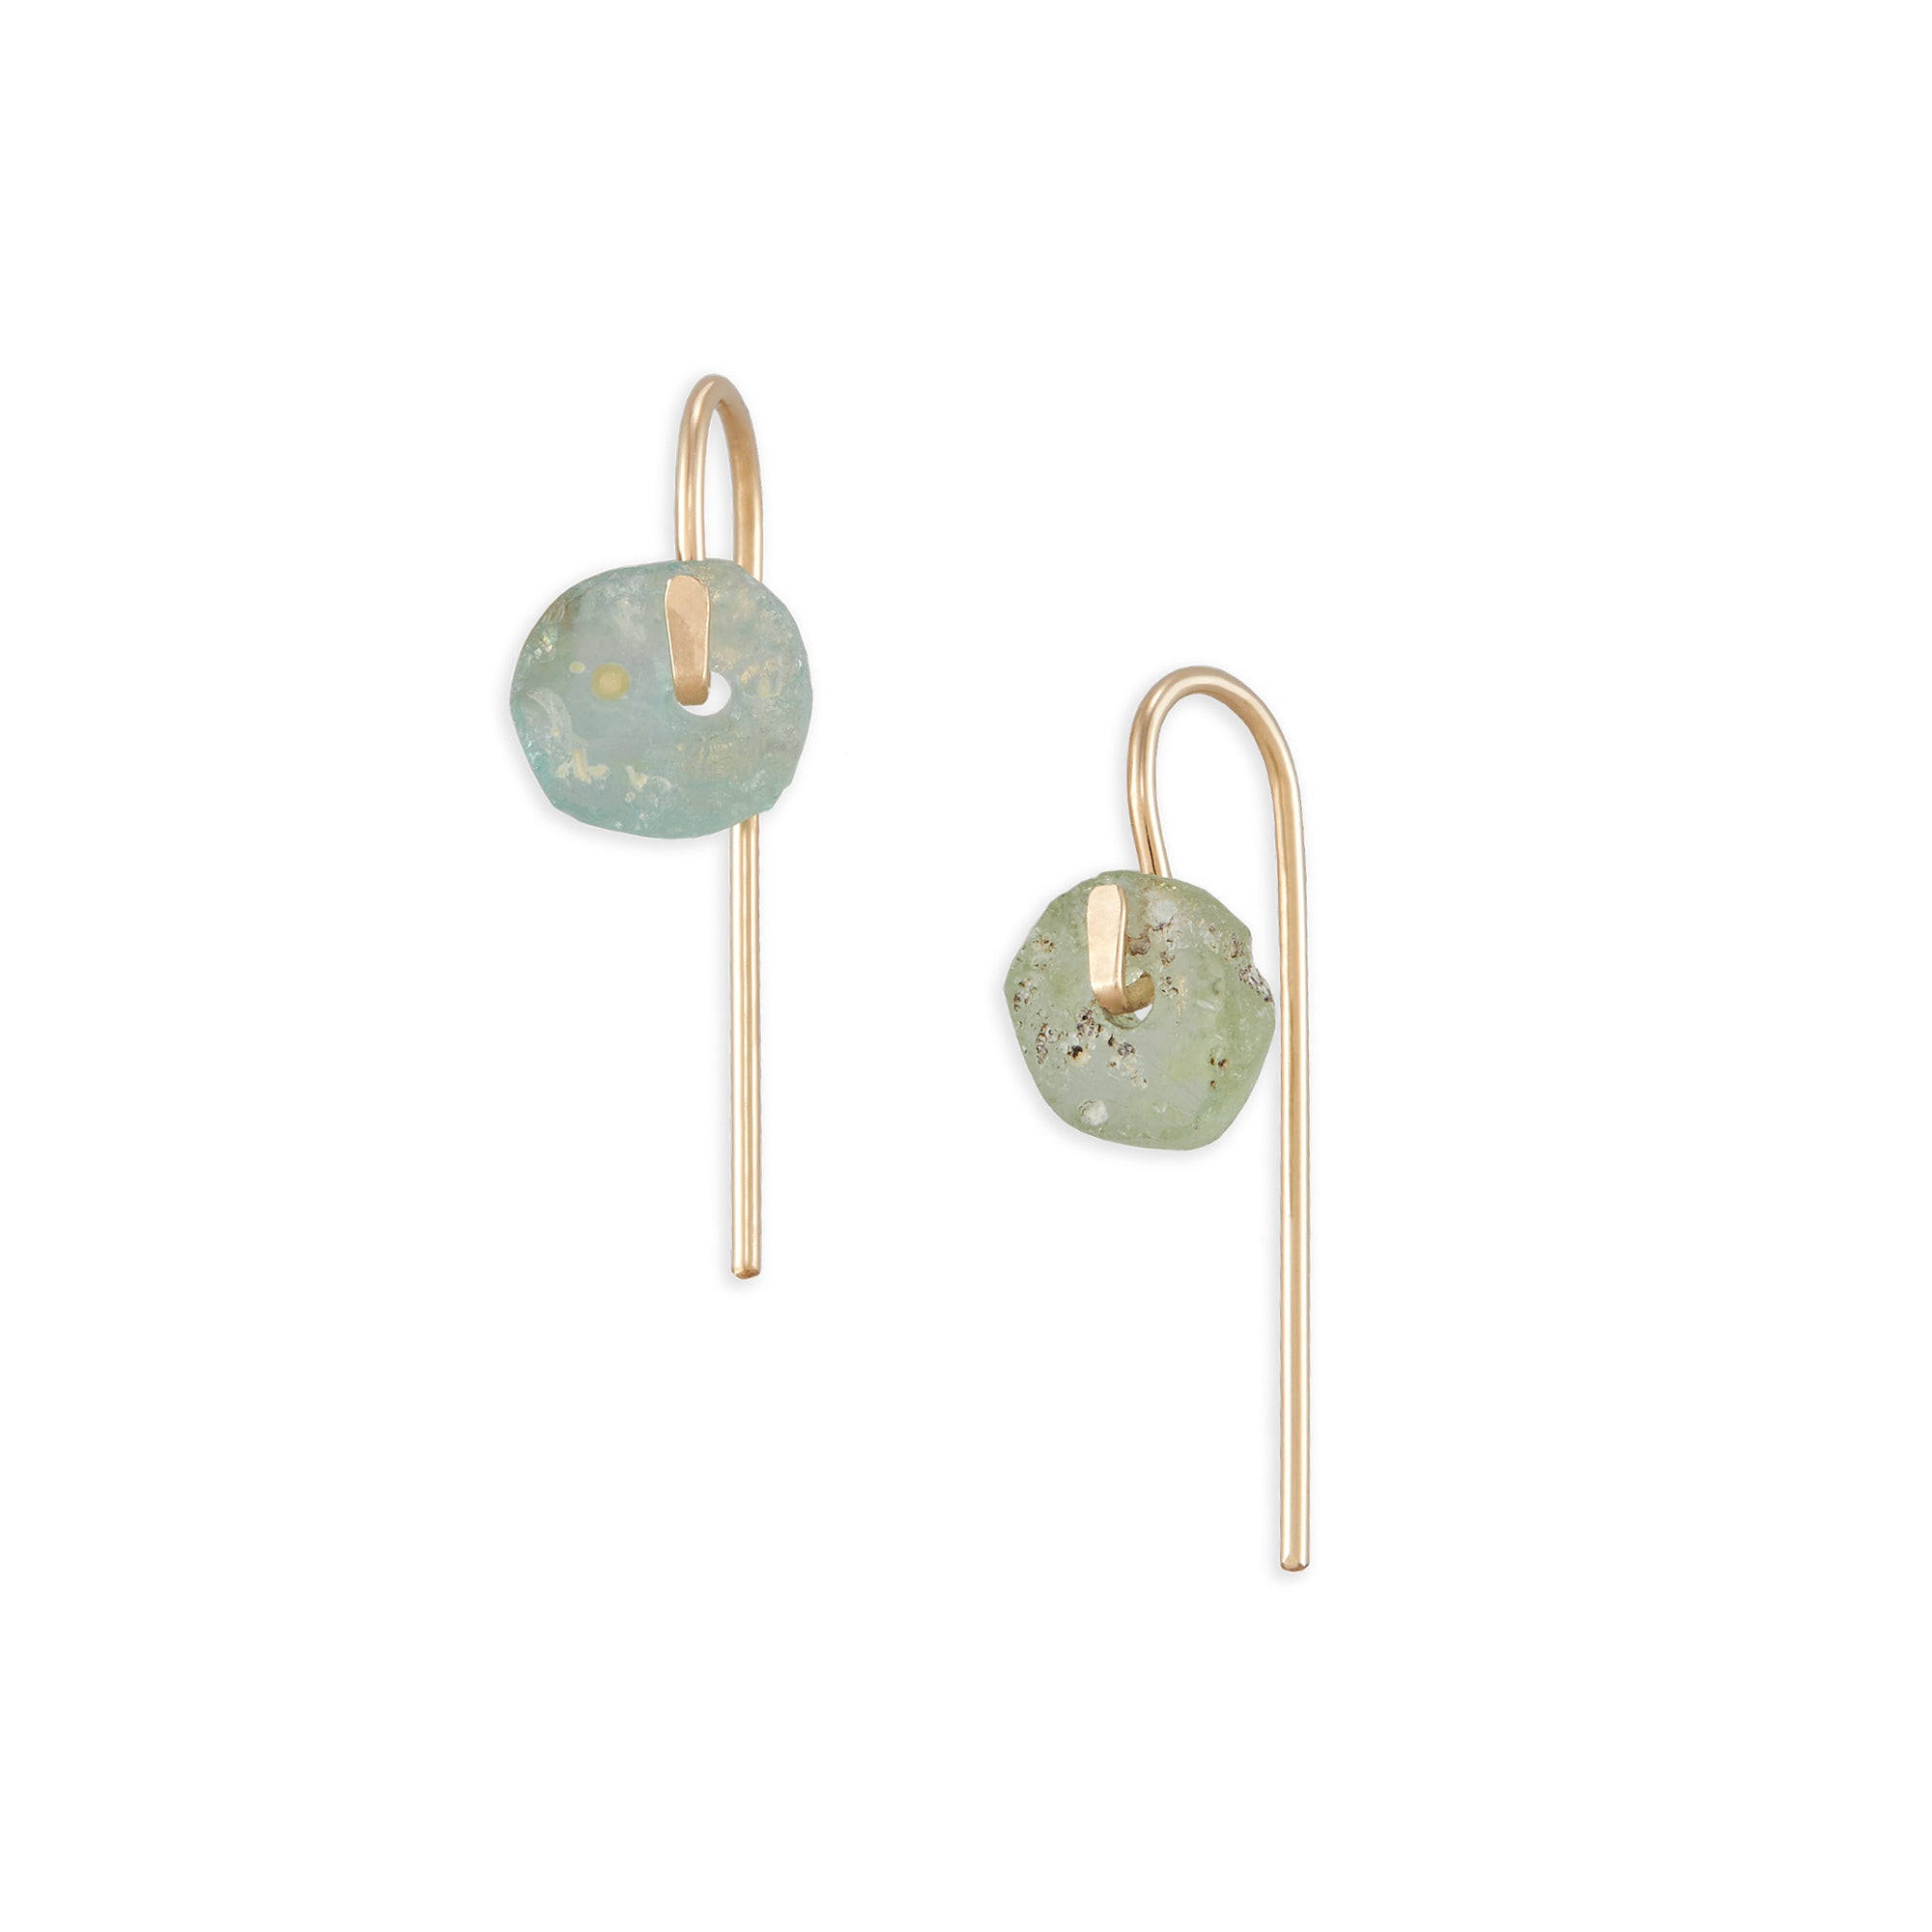 This small 14k gold hook is a threader style earring featuring a pair of unique Bactrian Glass beads. 